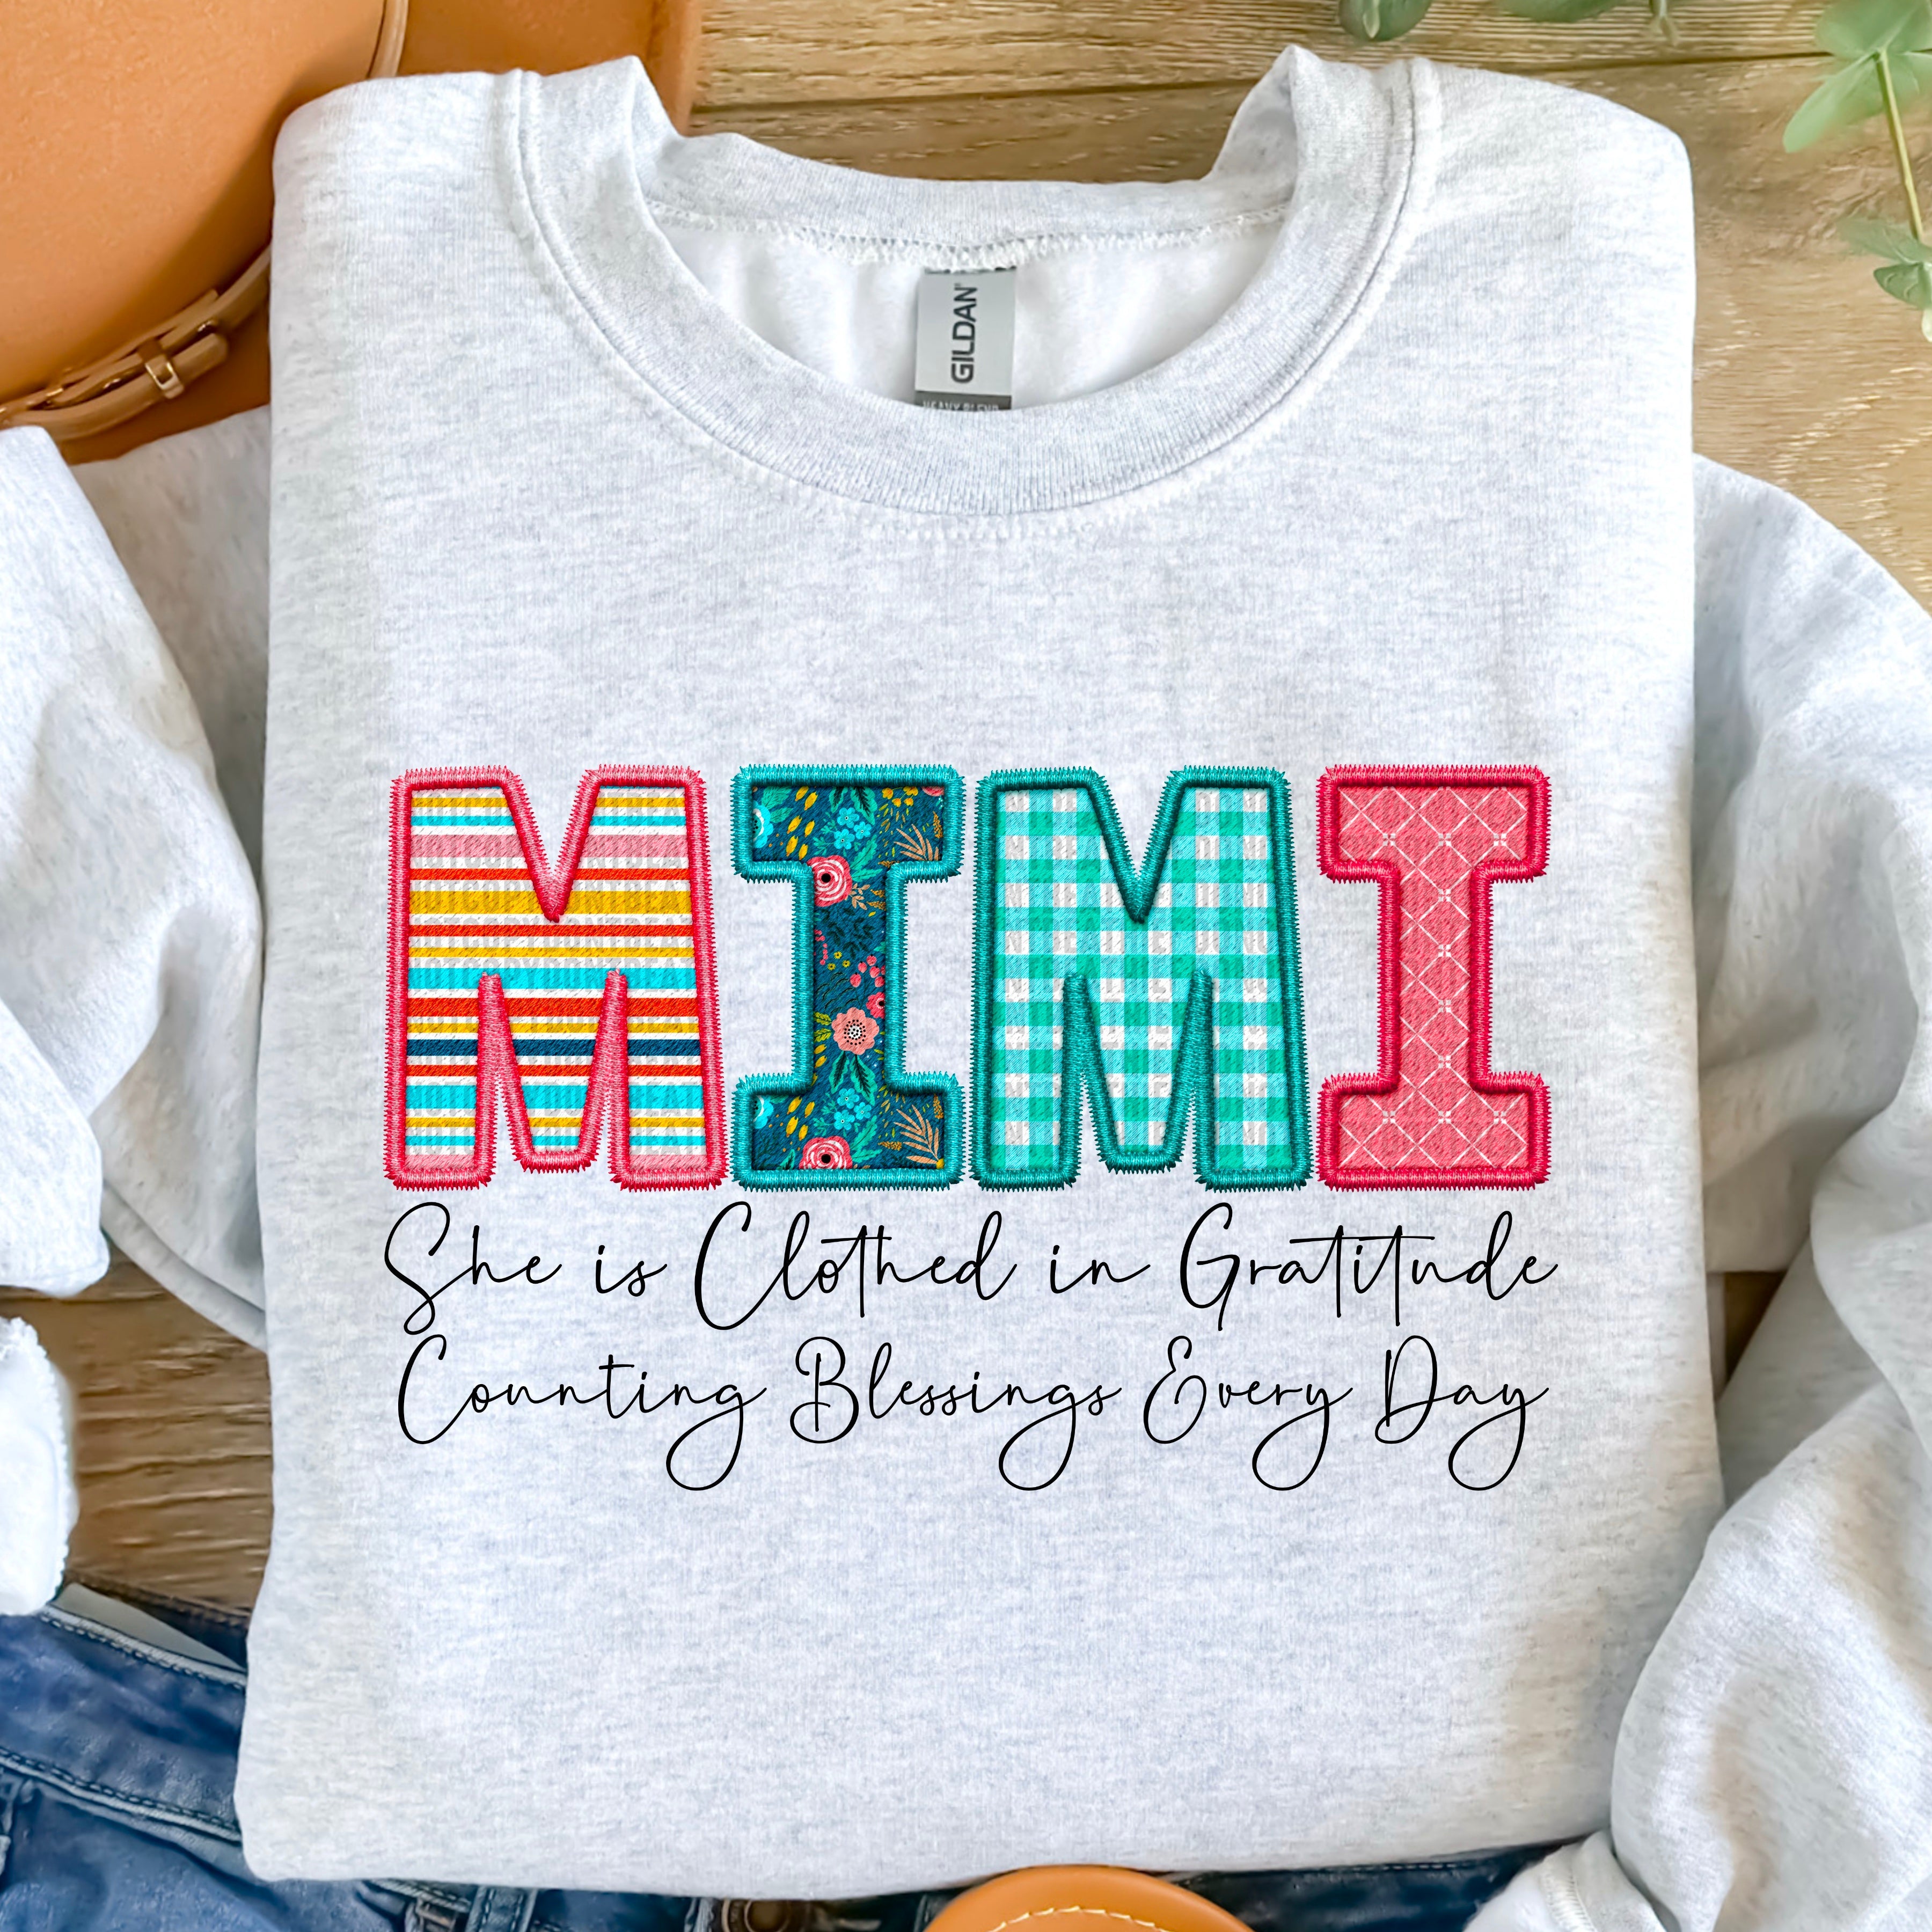 Clothed in Gratitude-Mimi-Completed